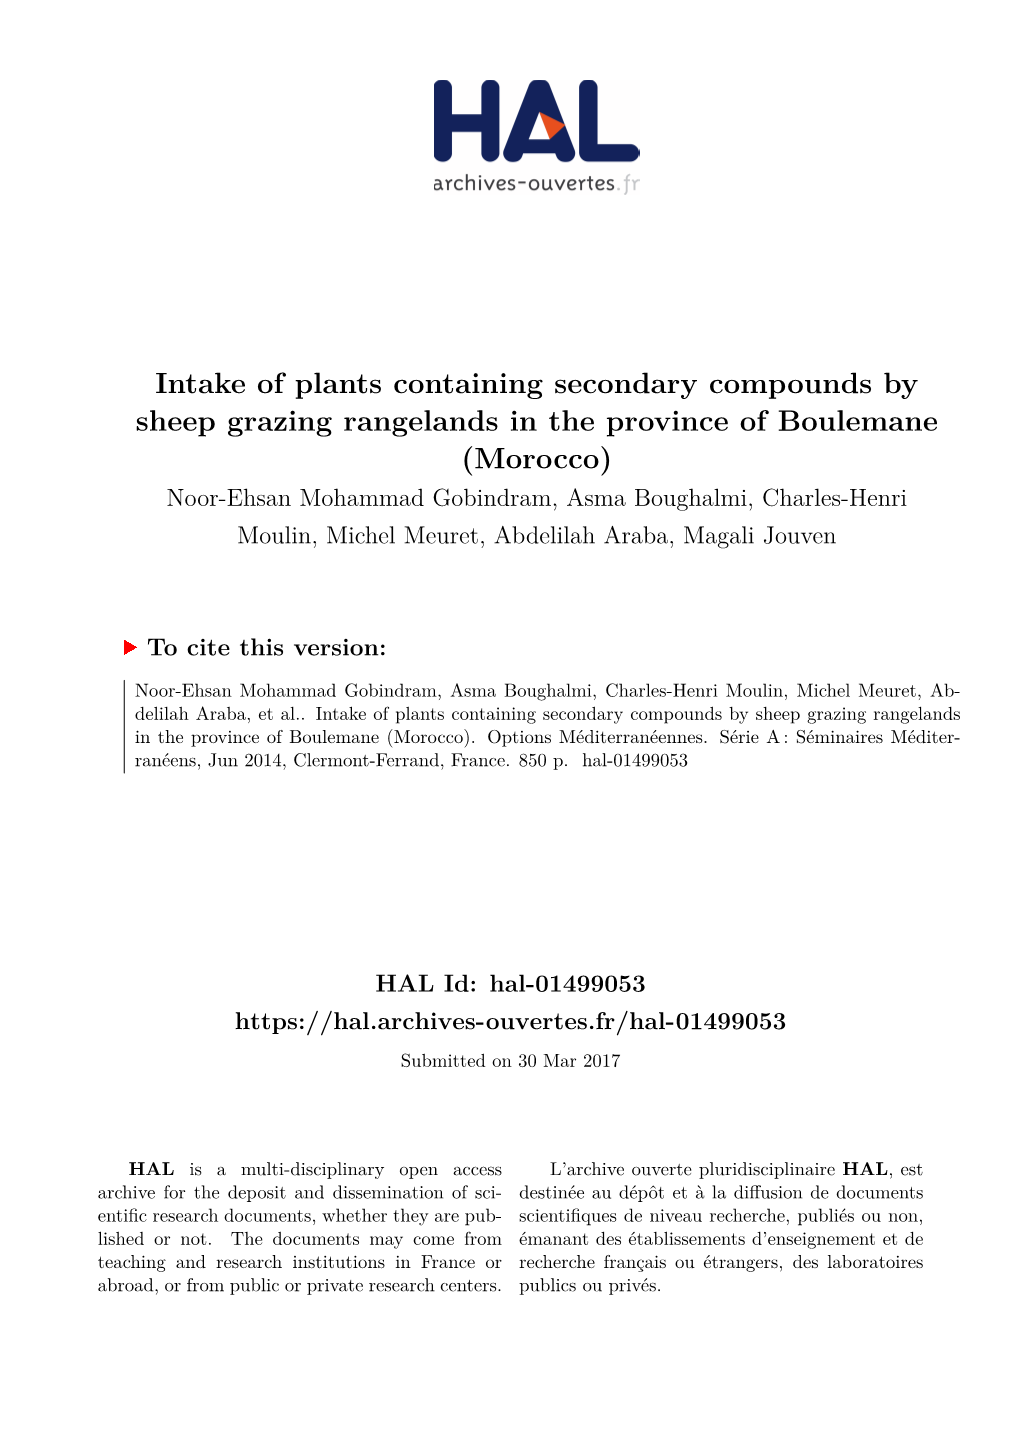 Intake of Plants Containing Secondary Compounds